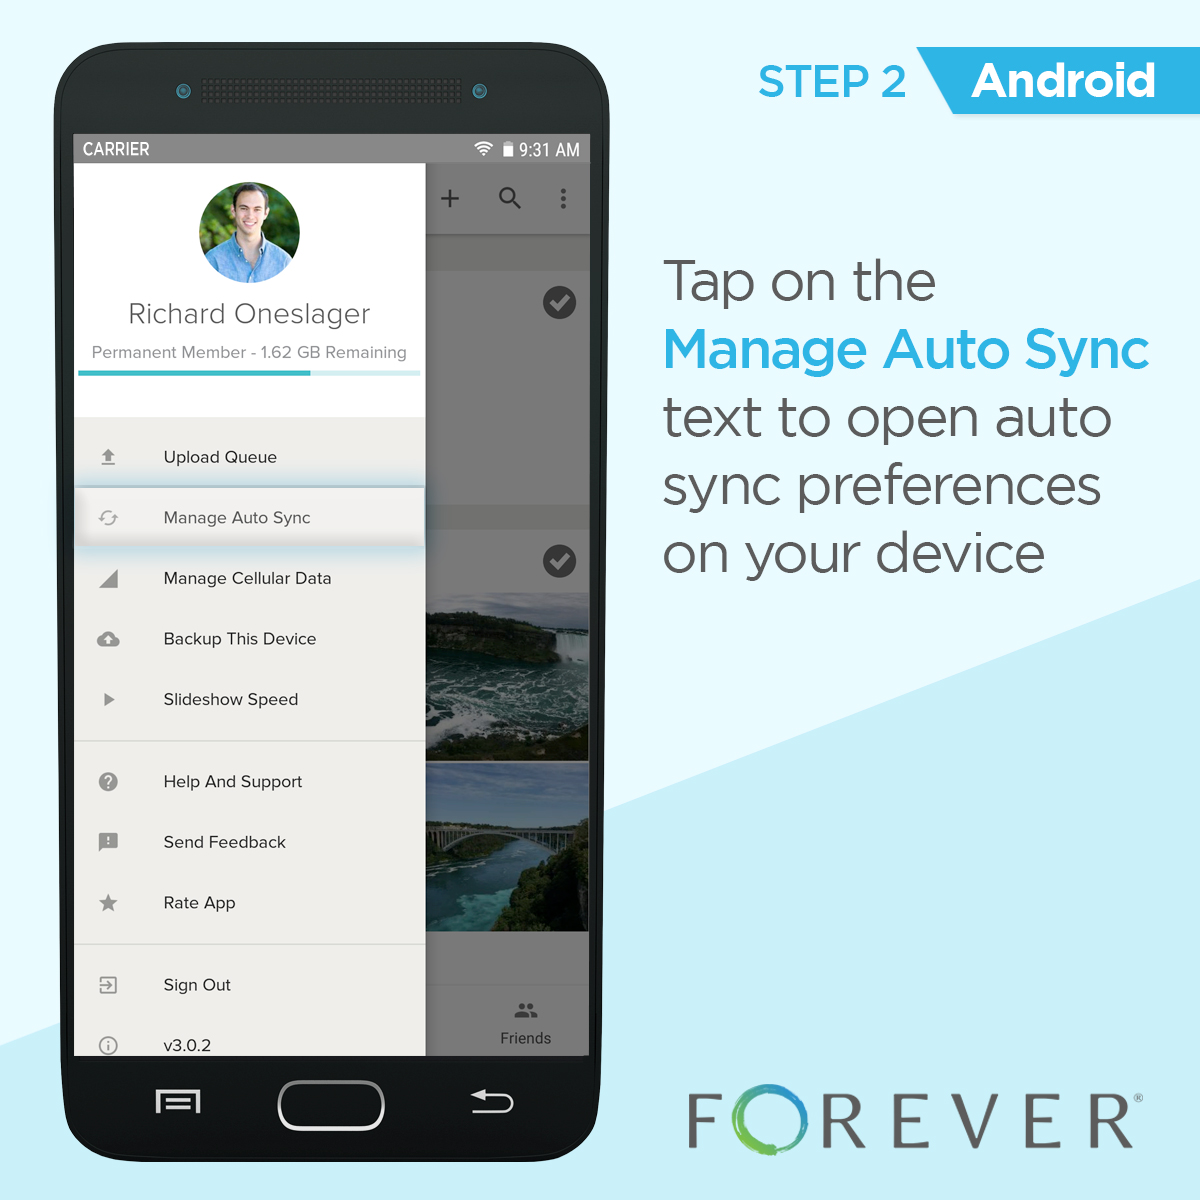 Where do I find auto sync on my Android phone?